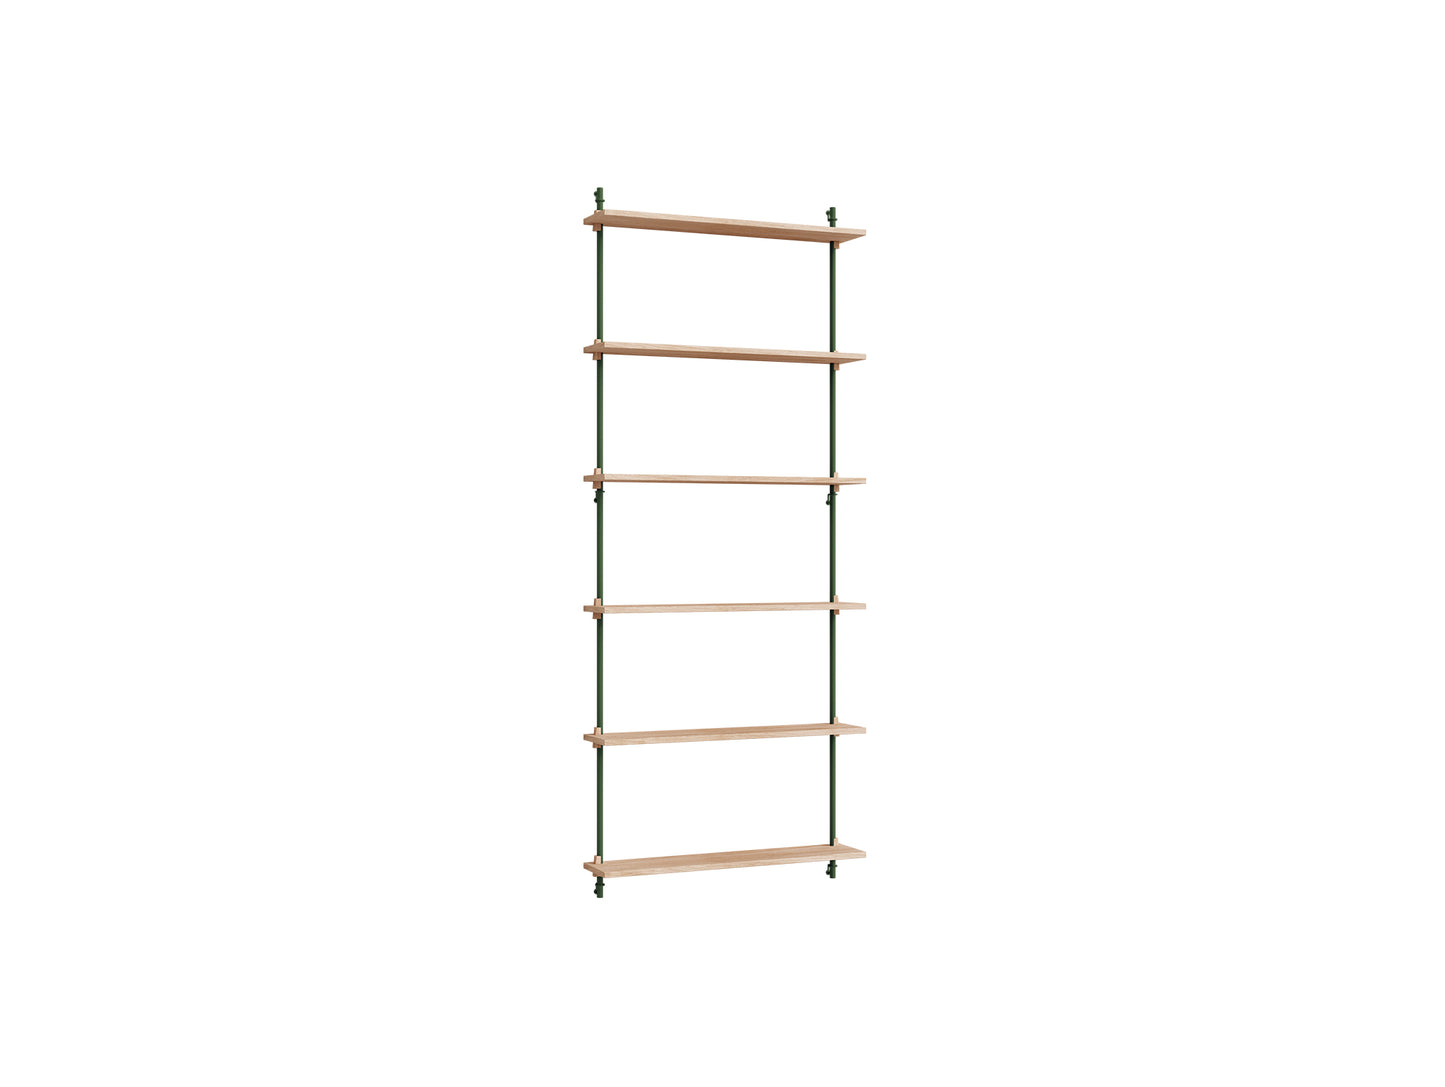 Wall Shelving System Sets (200 cm) by Moebe - WS.200.1 / Pine Green Uprights / Oiled Oak